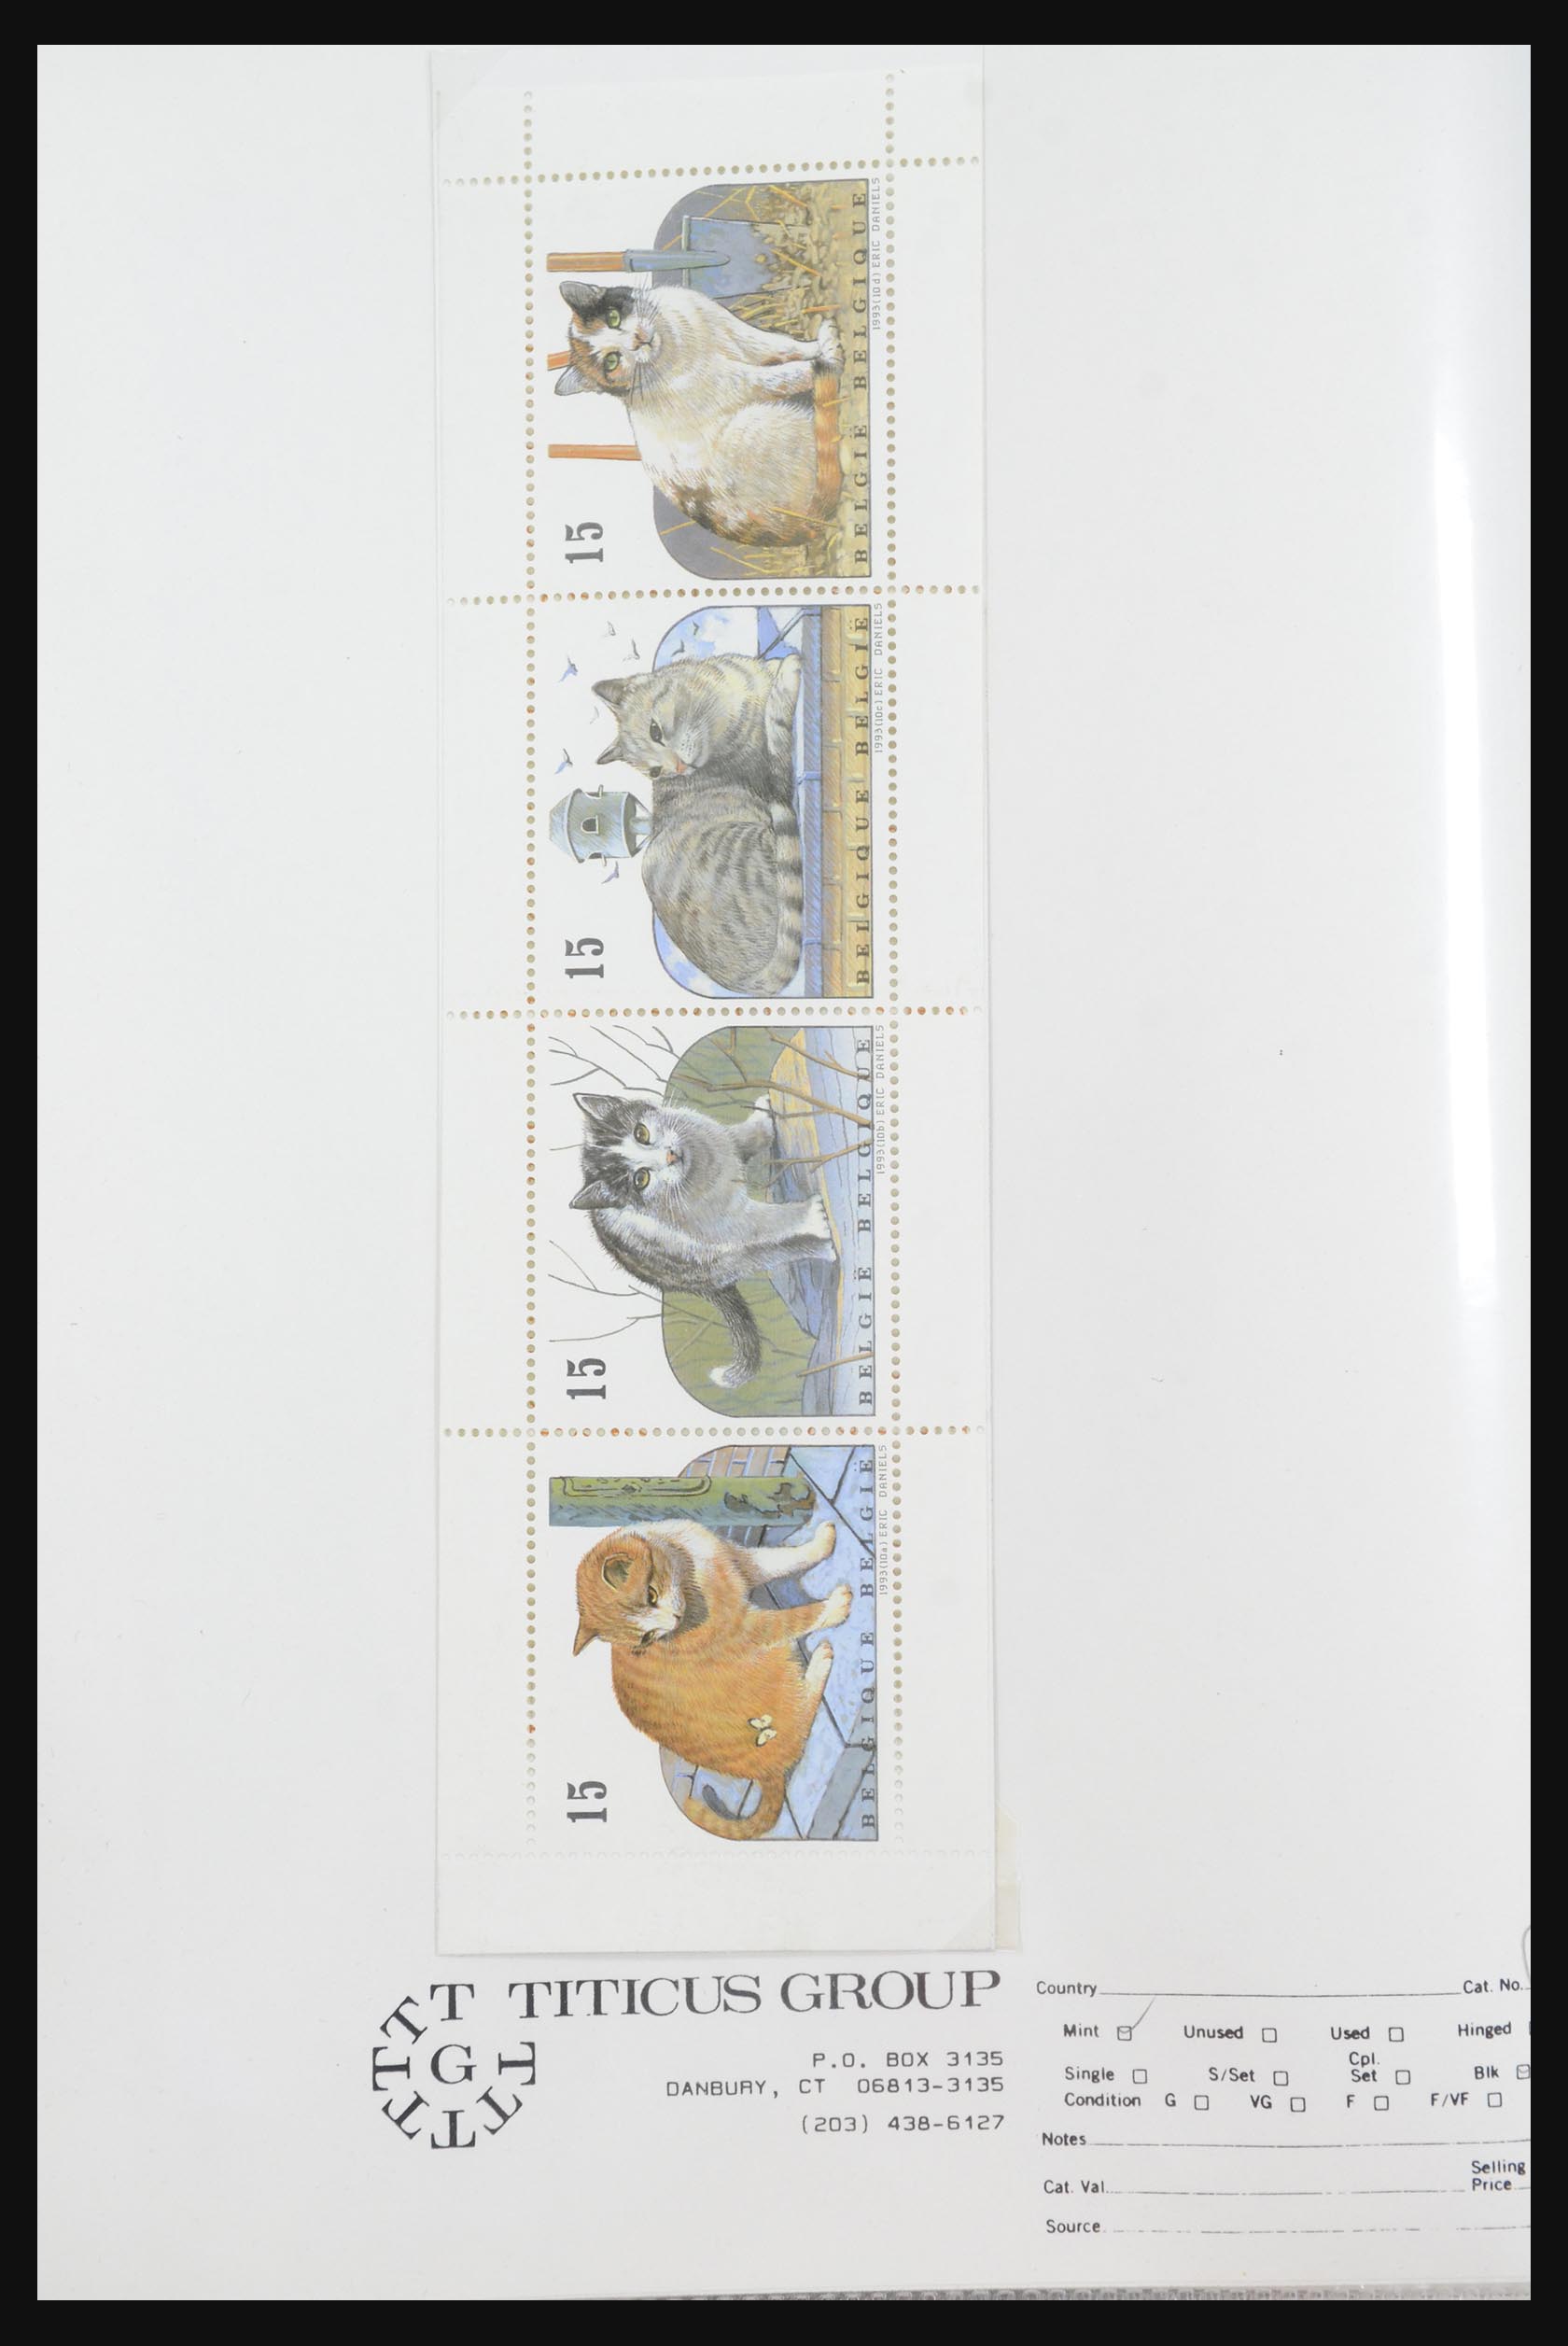 31915 090 - 31915 Western Europe souvenir sheets and stamp booklets on FDC.